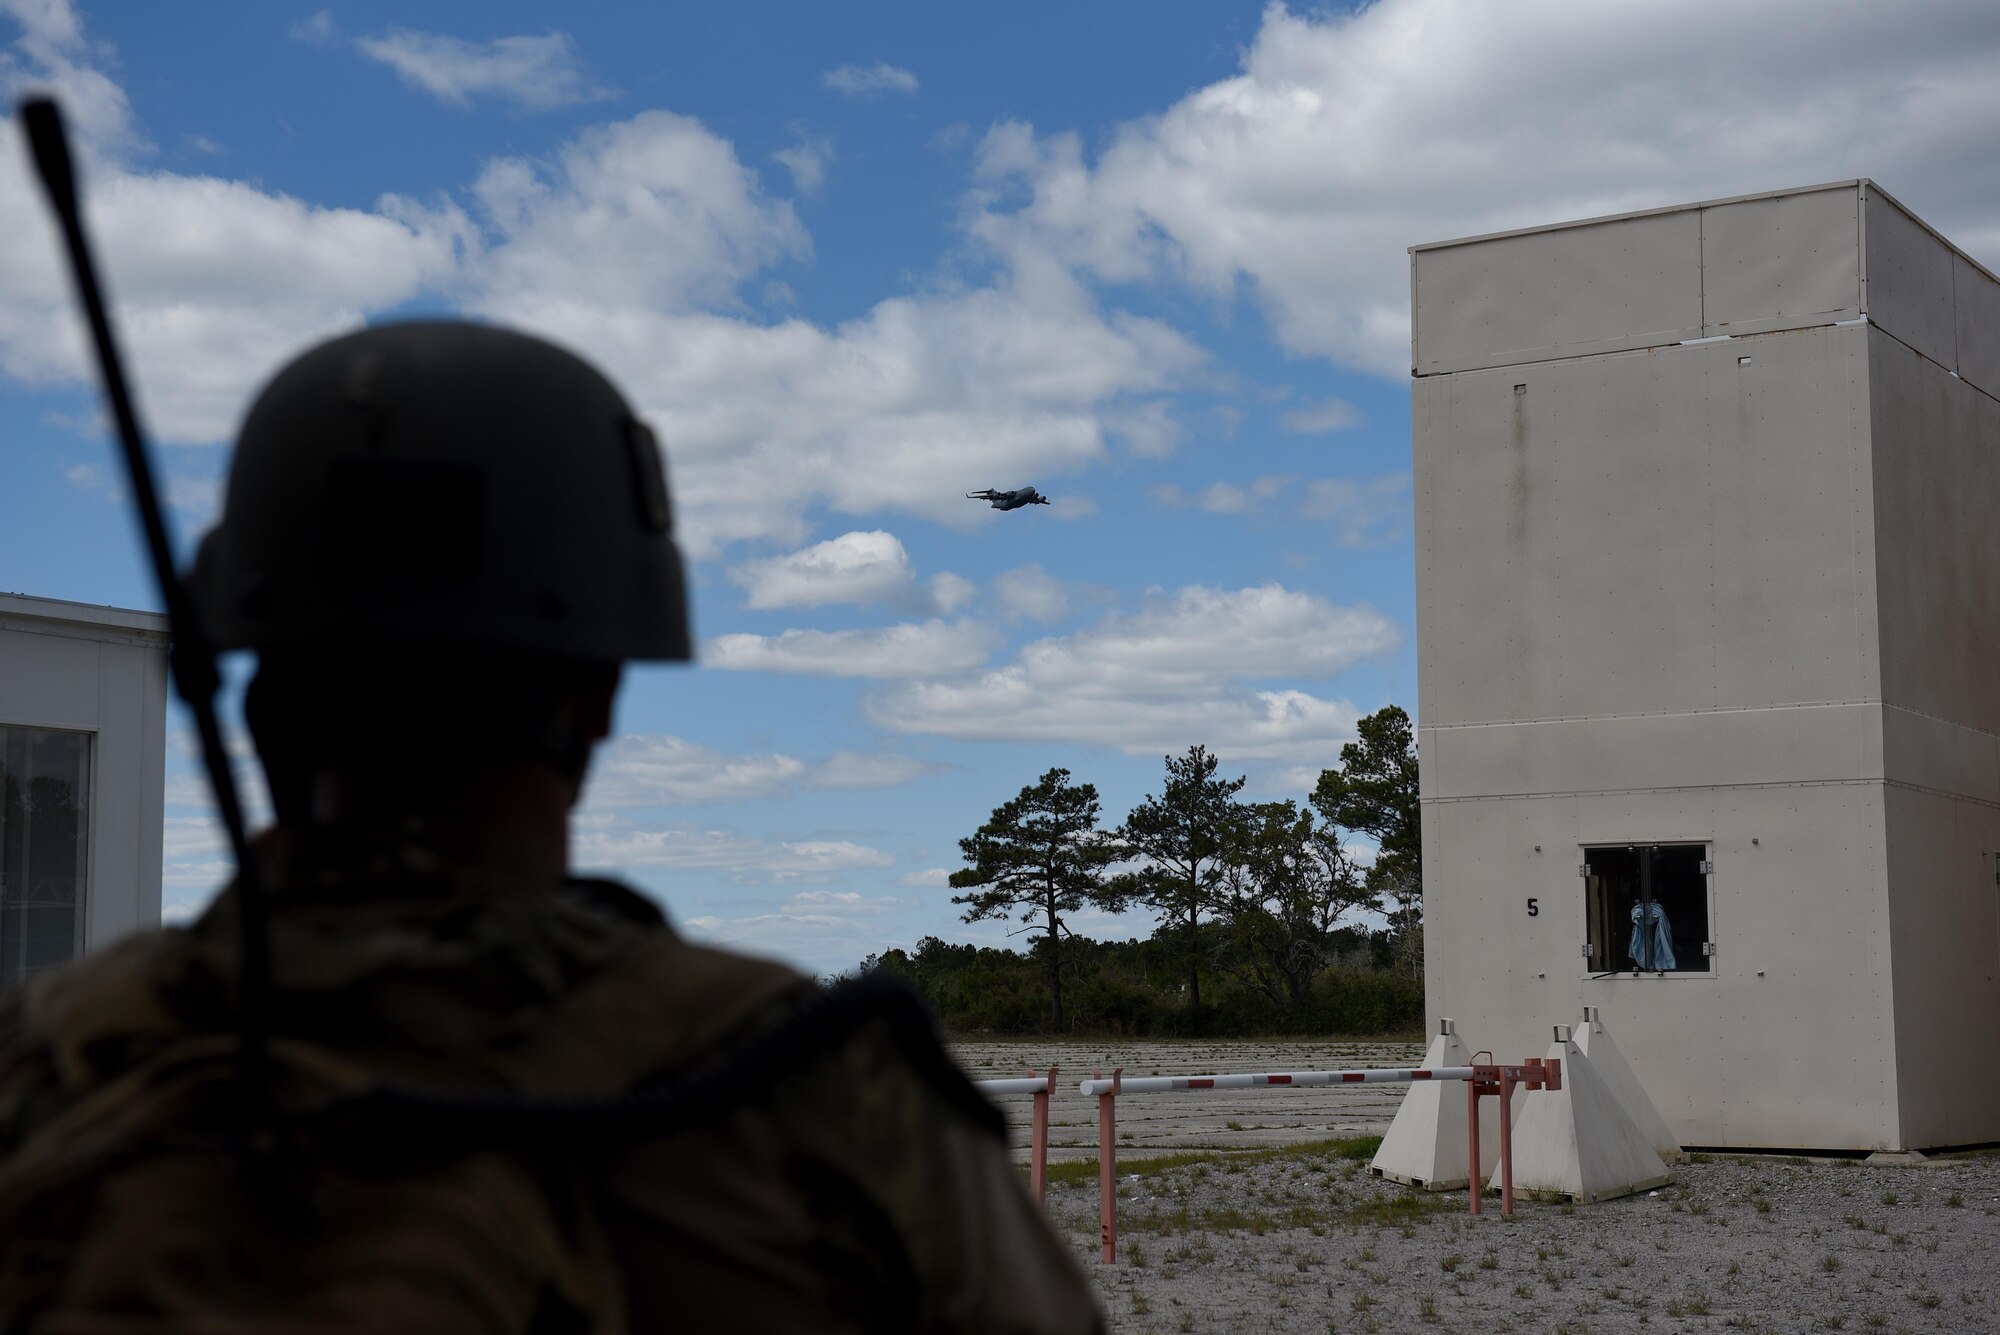 Airman 1st Class Cody Ambrose, 14th Air Support Operations Squadron tactical air control party, watches a C-17 Globemaster III simulate an airdrop during exercise Razor Talon, April 7, 2017, at Atlantic Field Marine Corps Outlying Field, North Carolina. Razor Talon is a monthly joint-force exercise that combines resources from multiple installations across the East Coast and is designed to integrate air, land and sea forces to promote a more cohesive atmosphere between the different military services. (U.S. Air Force photo by Airman 1st Class Kenneth Boyton)